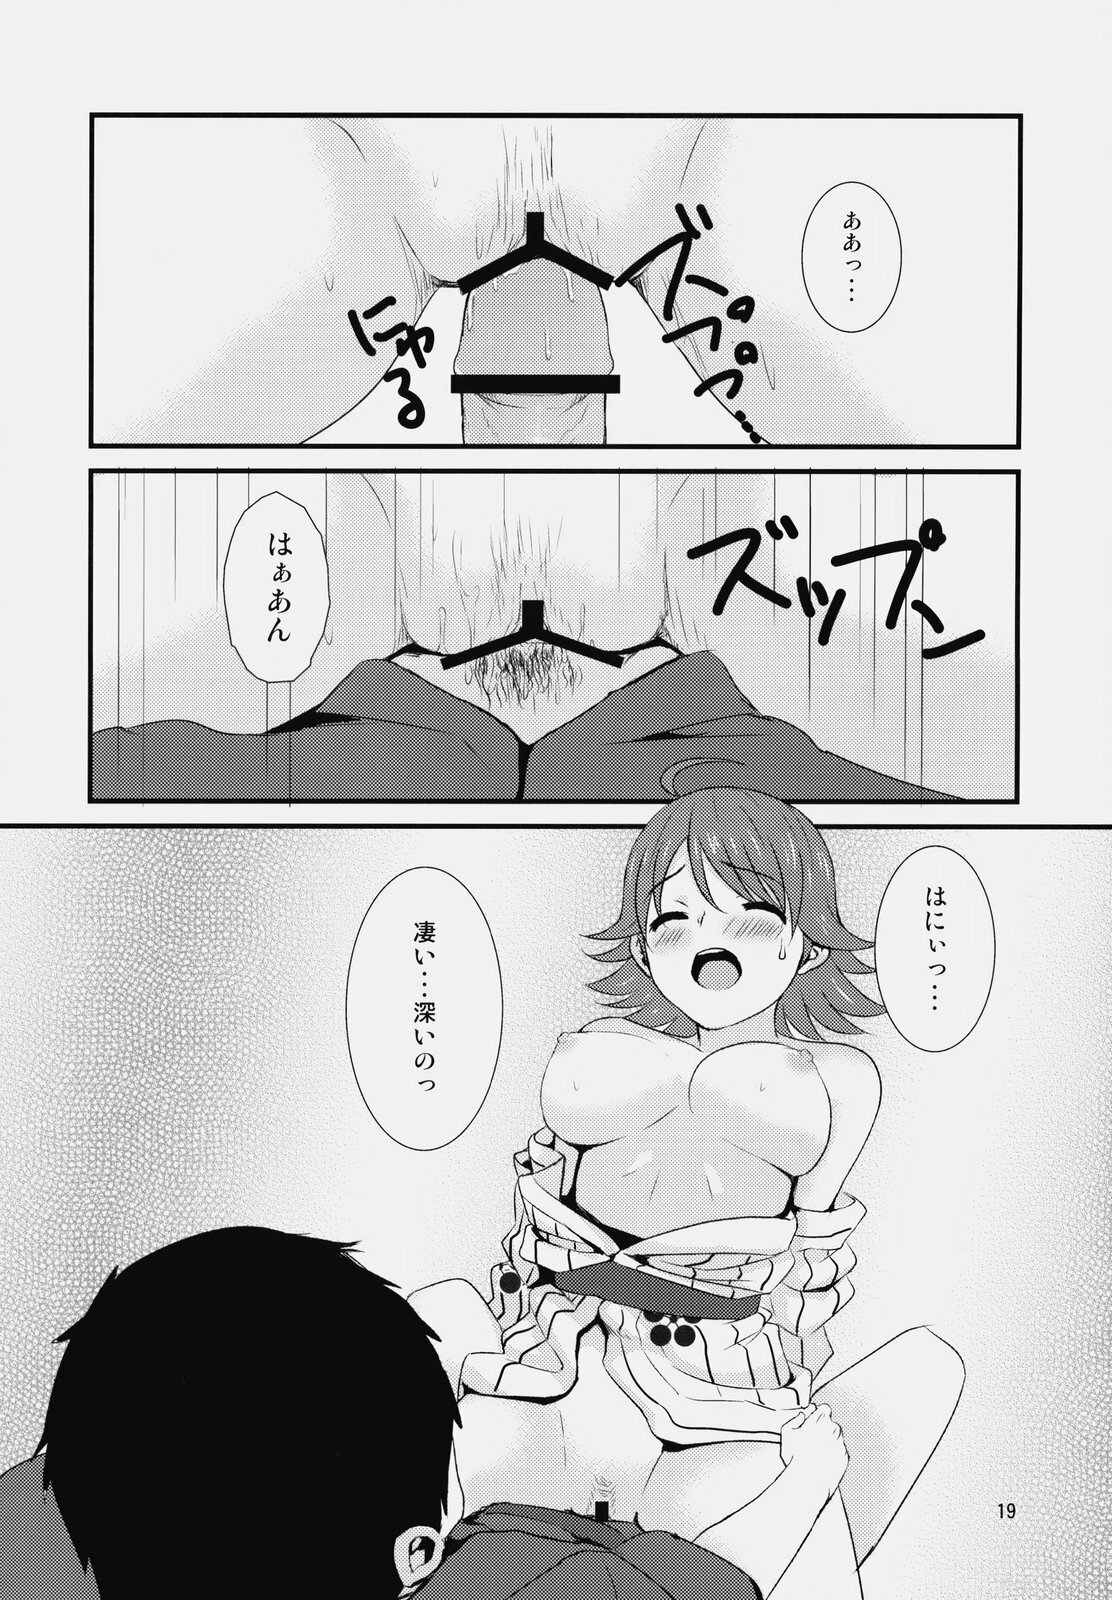 (Appeal For you!!) [Iorigumi (Tokita Alumi)] traveling (THE IDOLM@STER) page 18 full